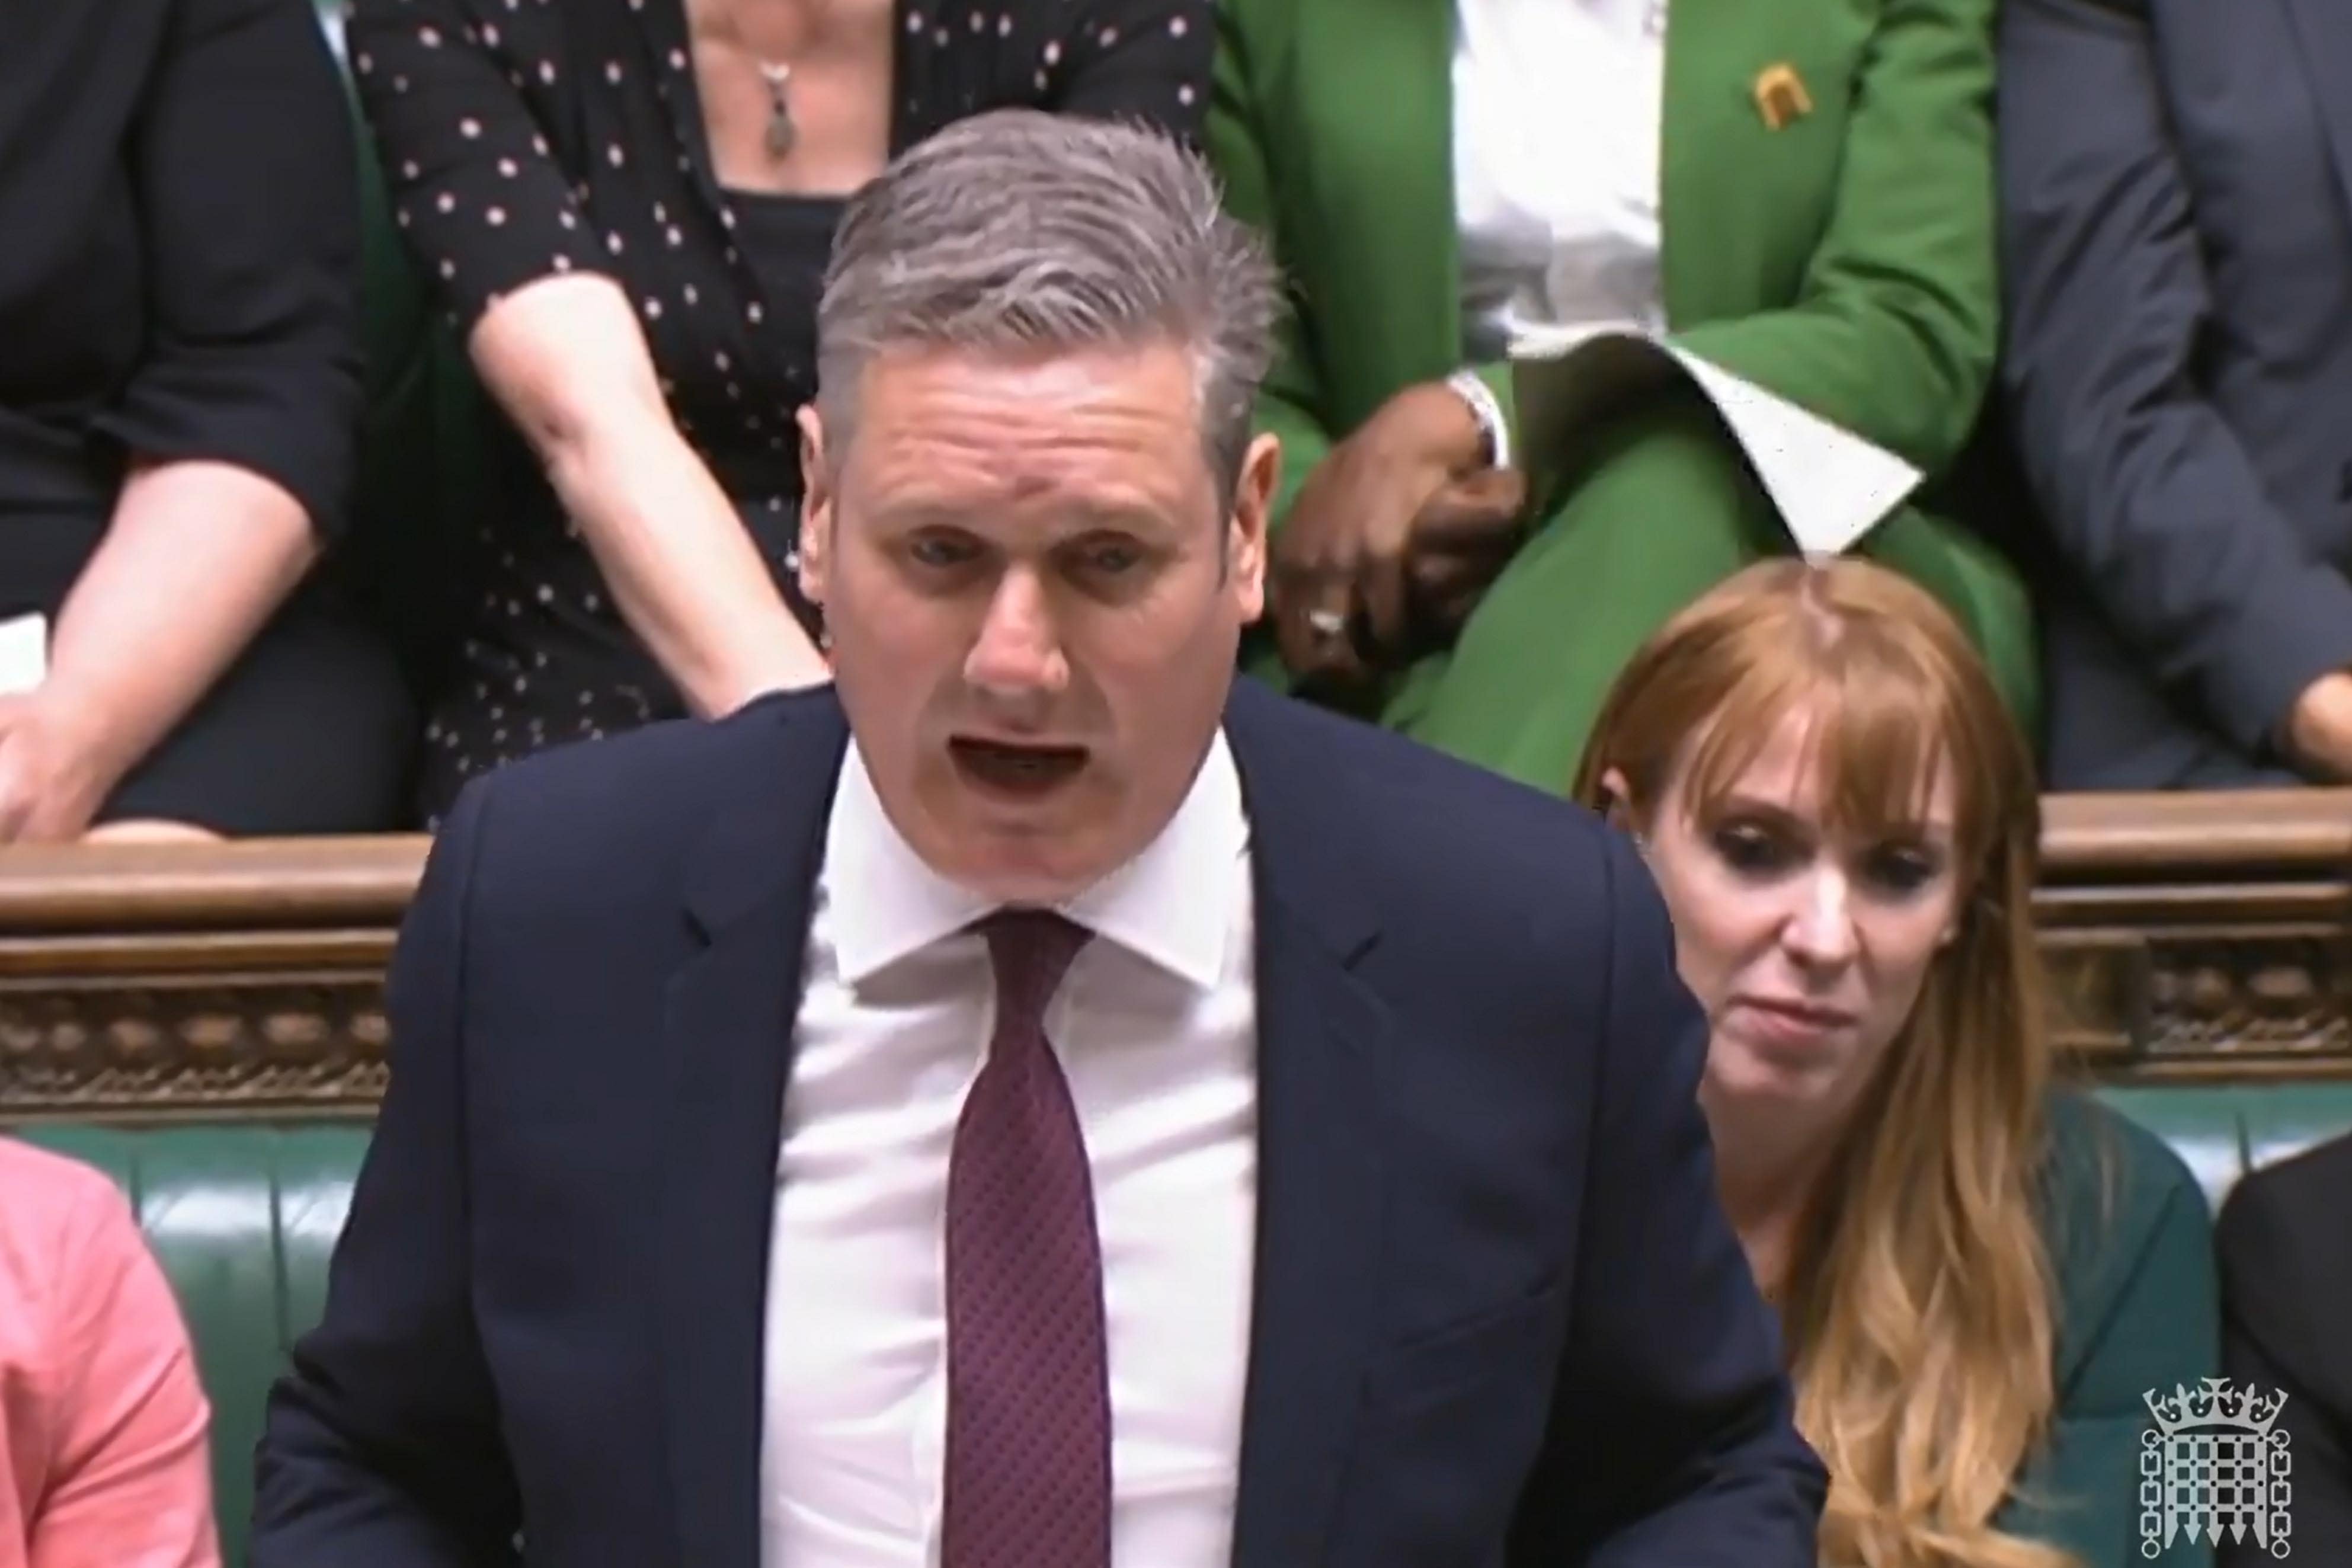 Labour leader Sir Keir Starmer speaks during Prime Minister’s Questions in the House of Commons (House of Commons/UK Parliament)